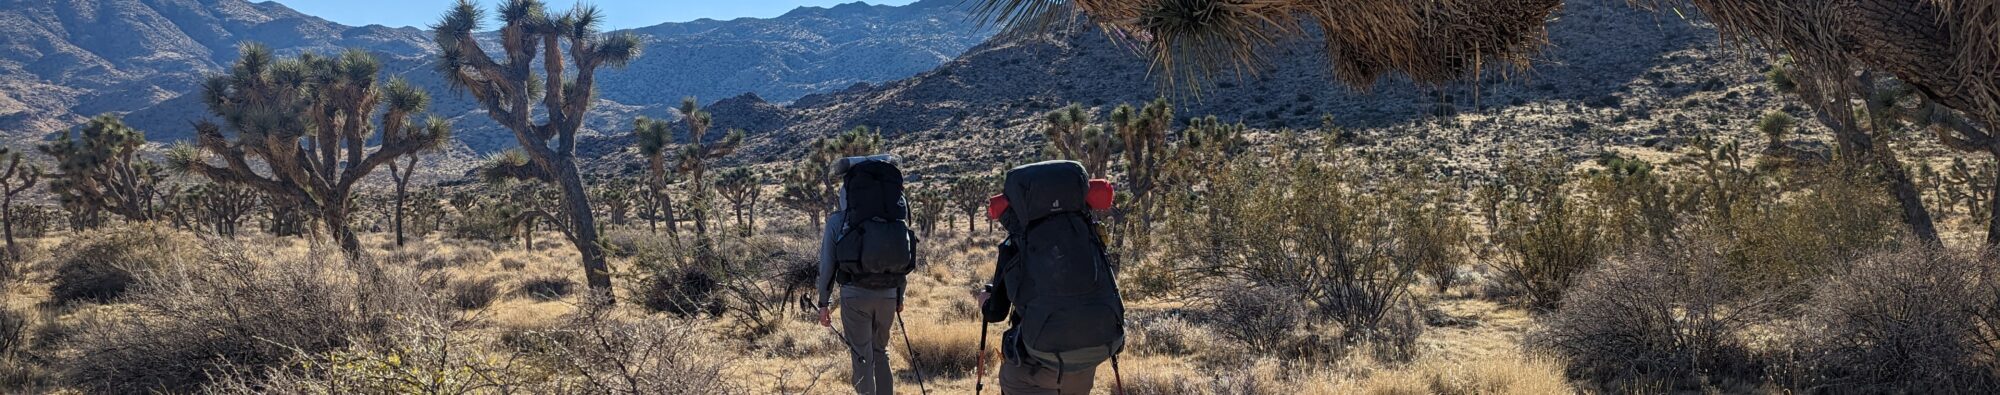 Two people backpack through Joshua Tree National Park in California